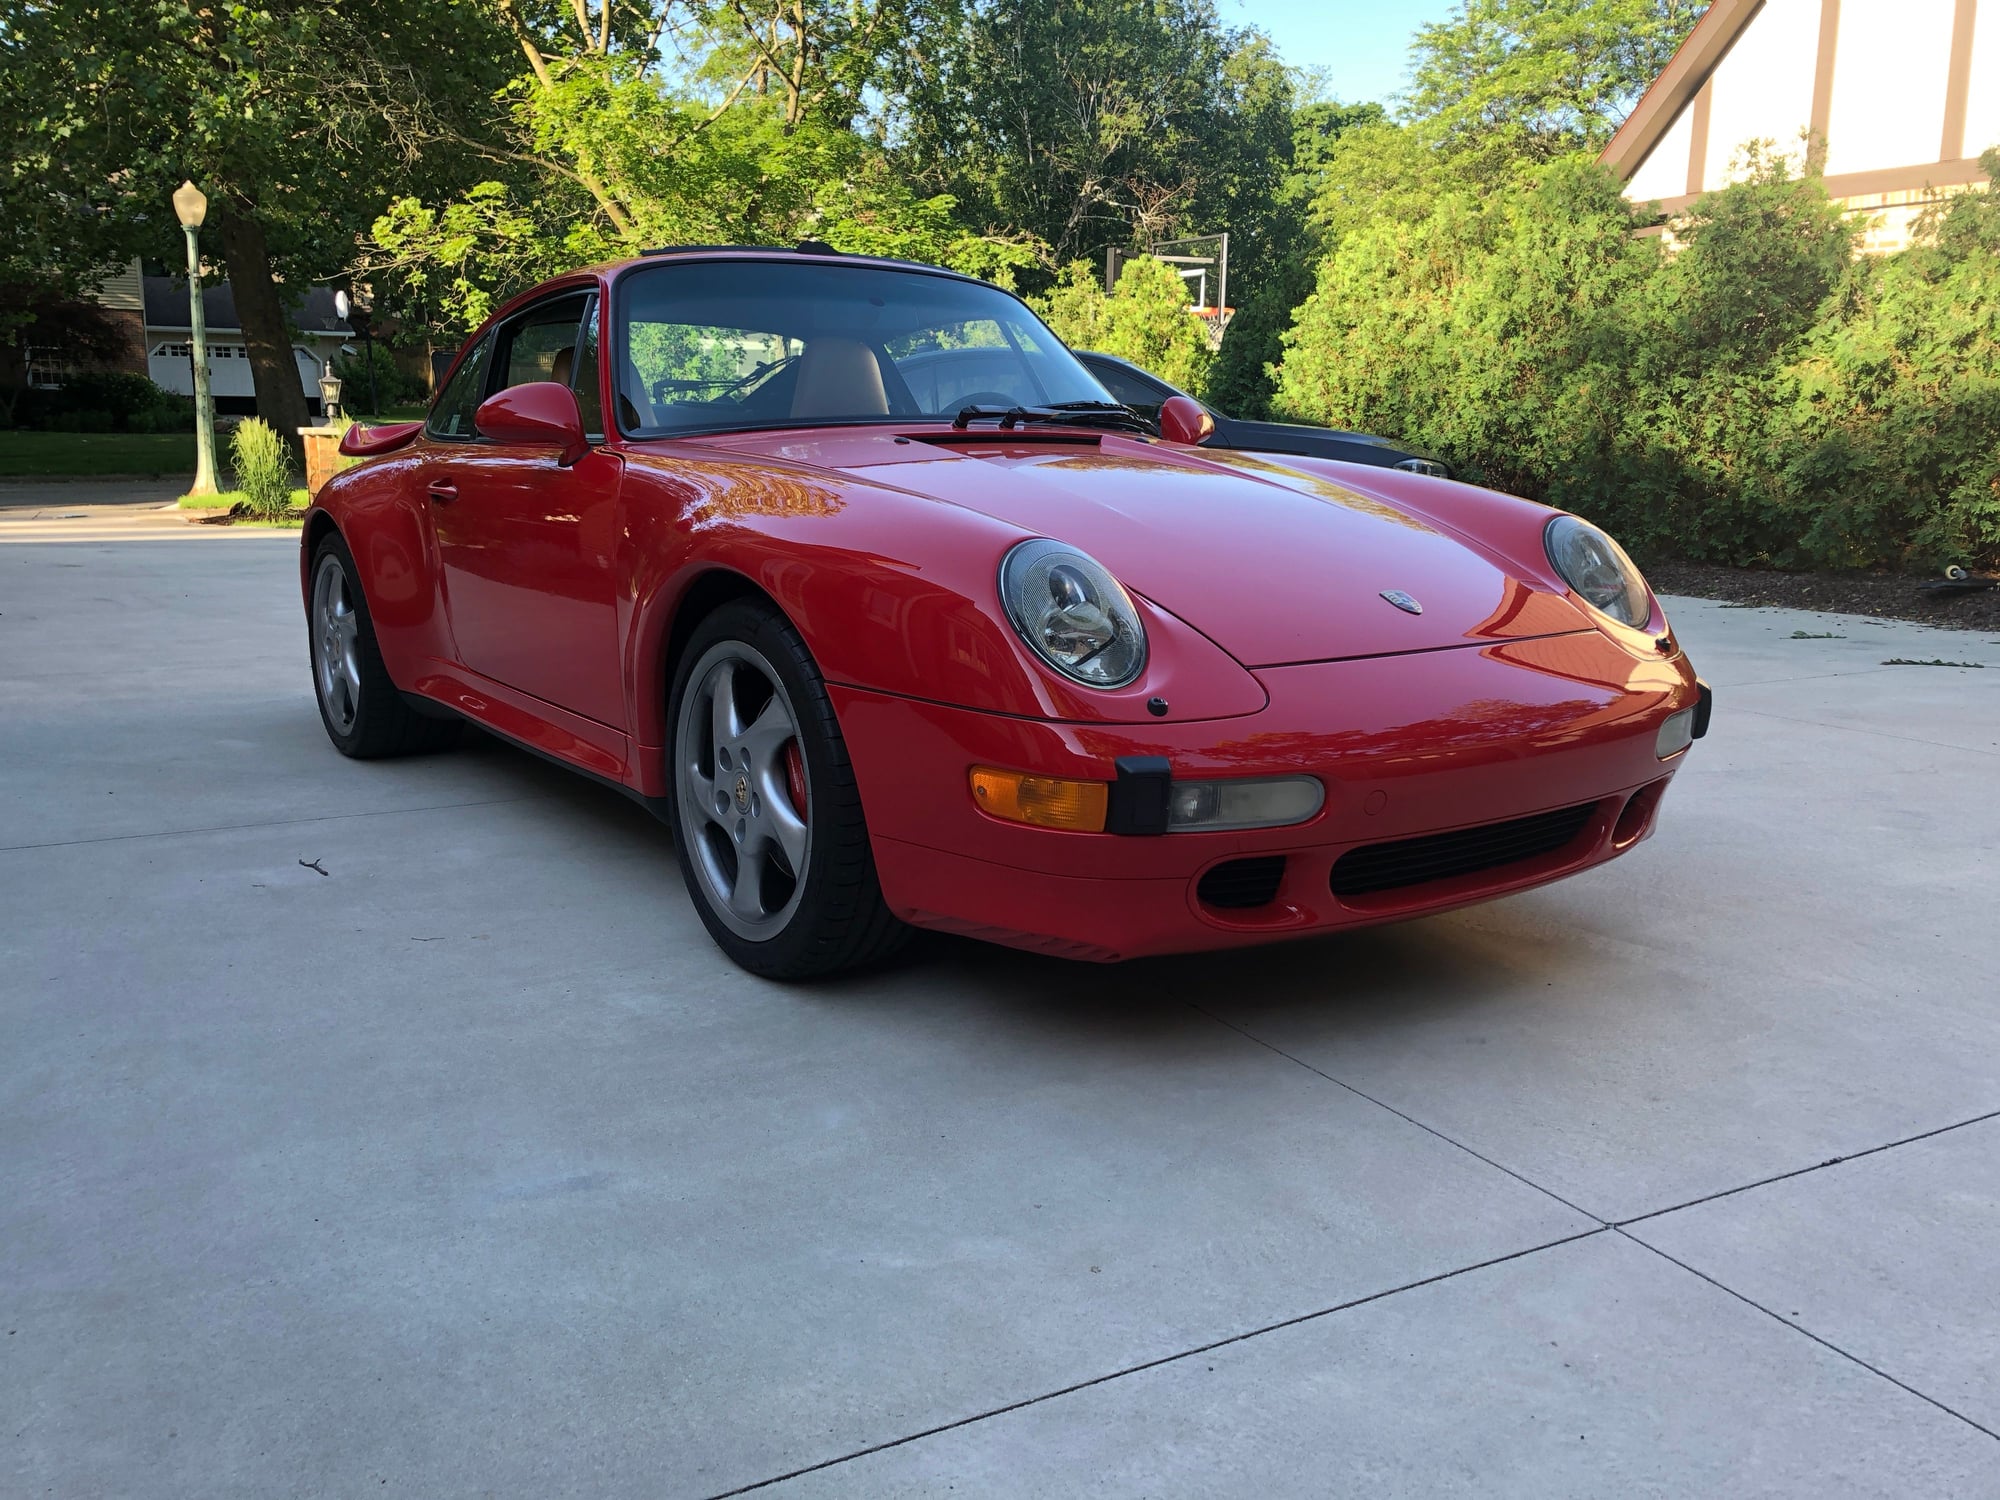 1996 Porsche 911 - 1996 993TT Guard Red - Used - VIN WP0AC2993TS375219 - 48,800 Miles - 6 cyl - AWD - Manual - Coupe - Red - Grand Rapids, MI 49506, United States